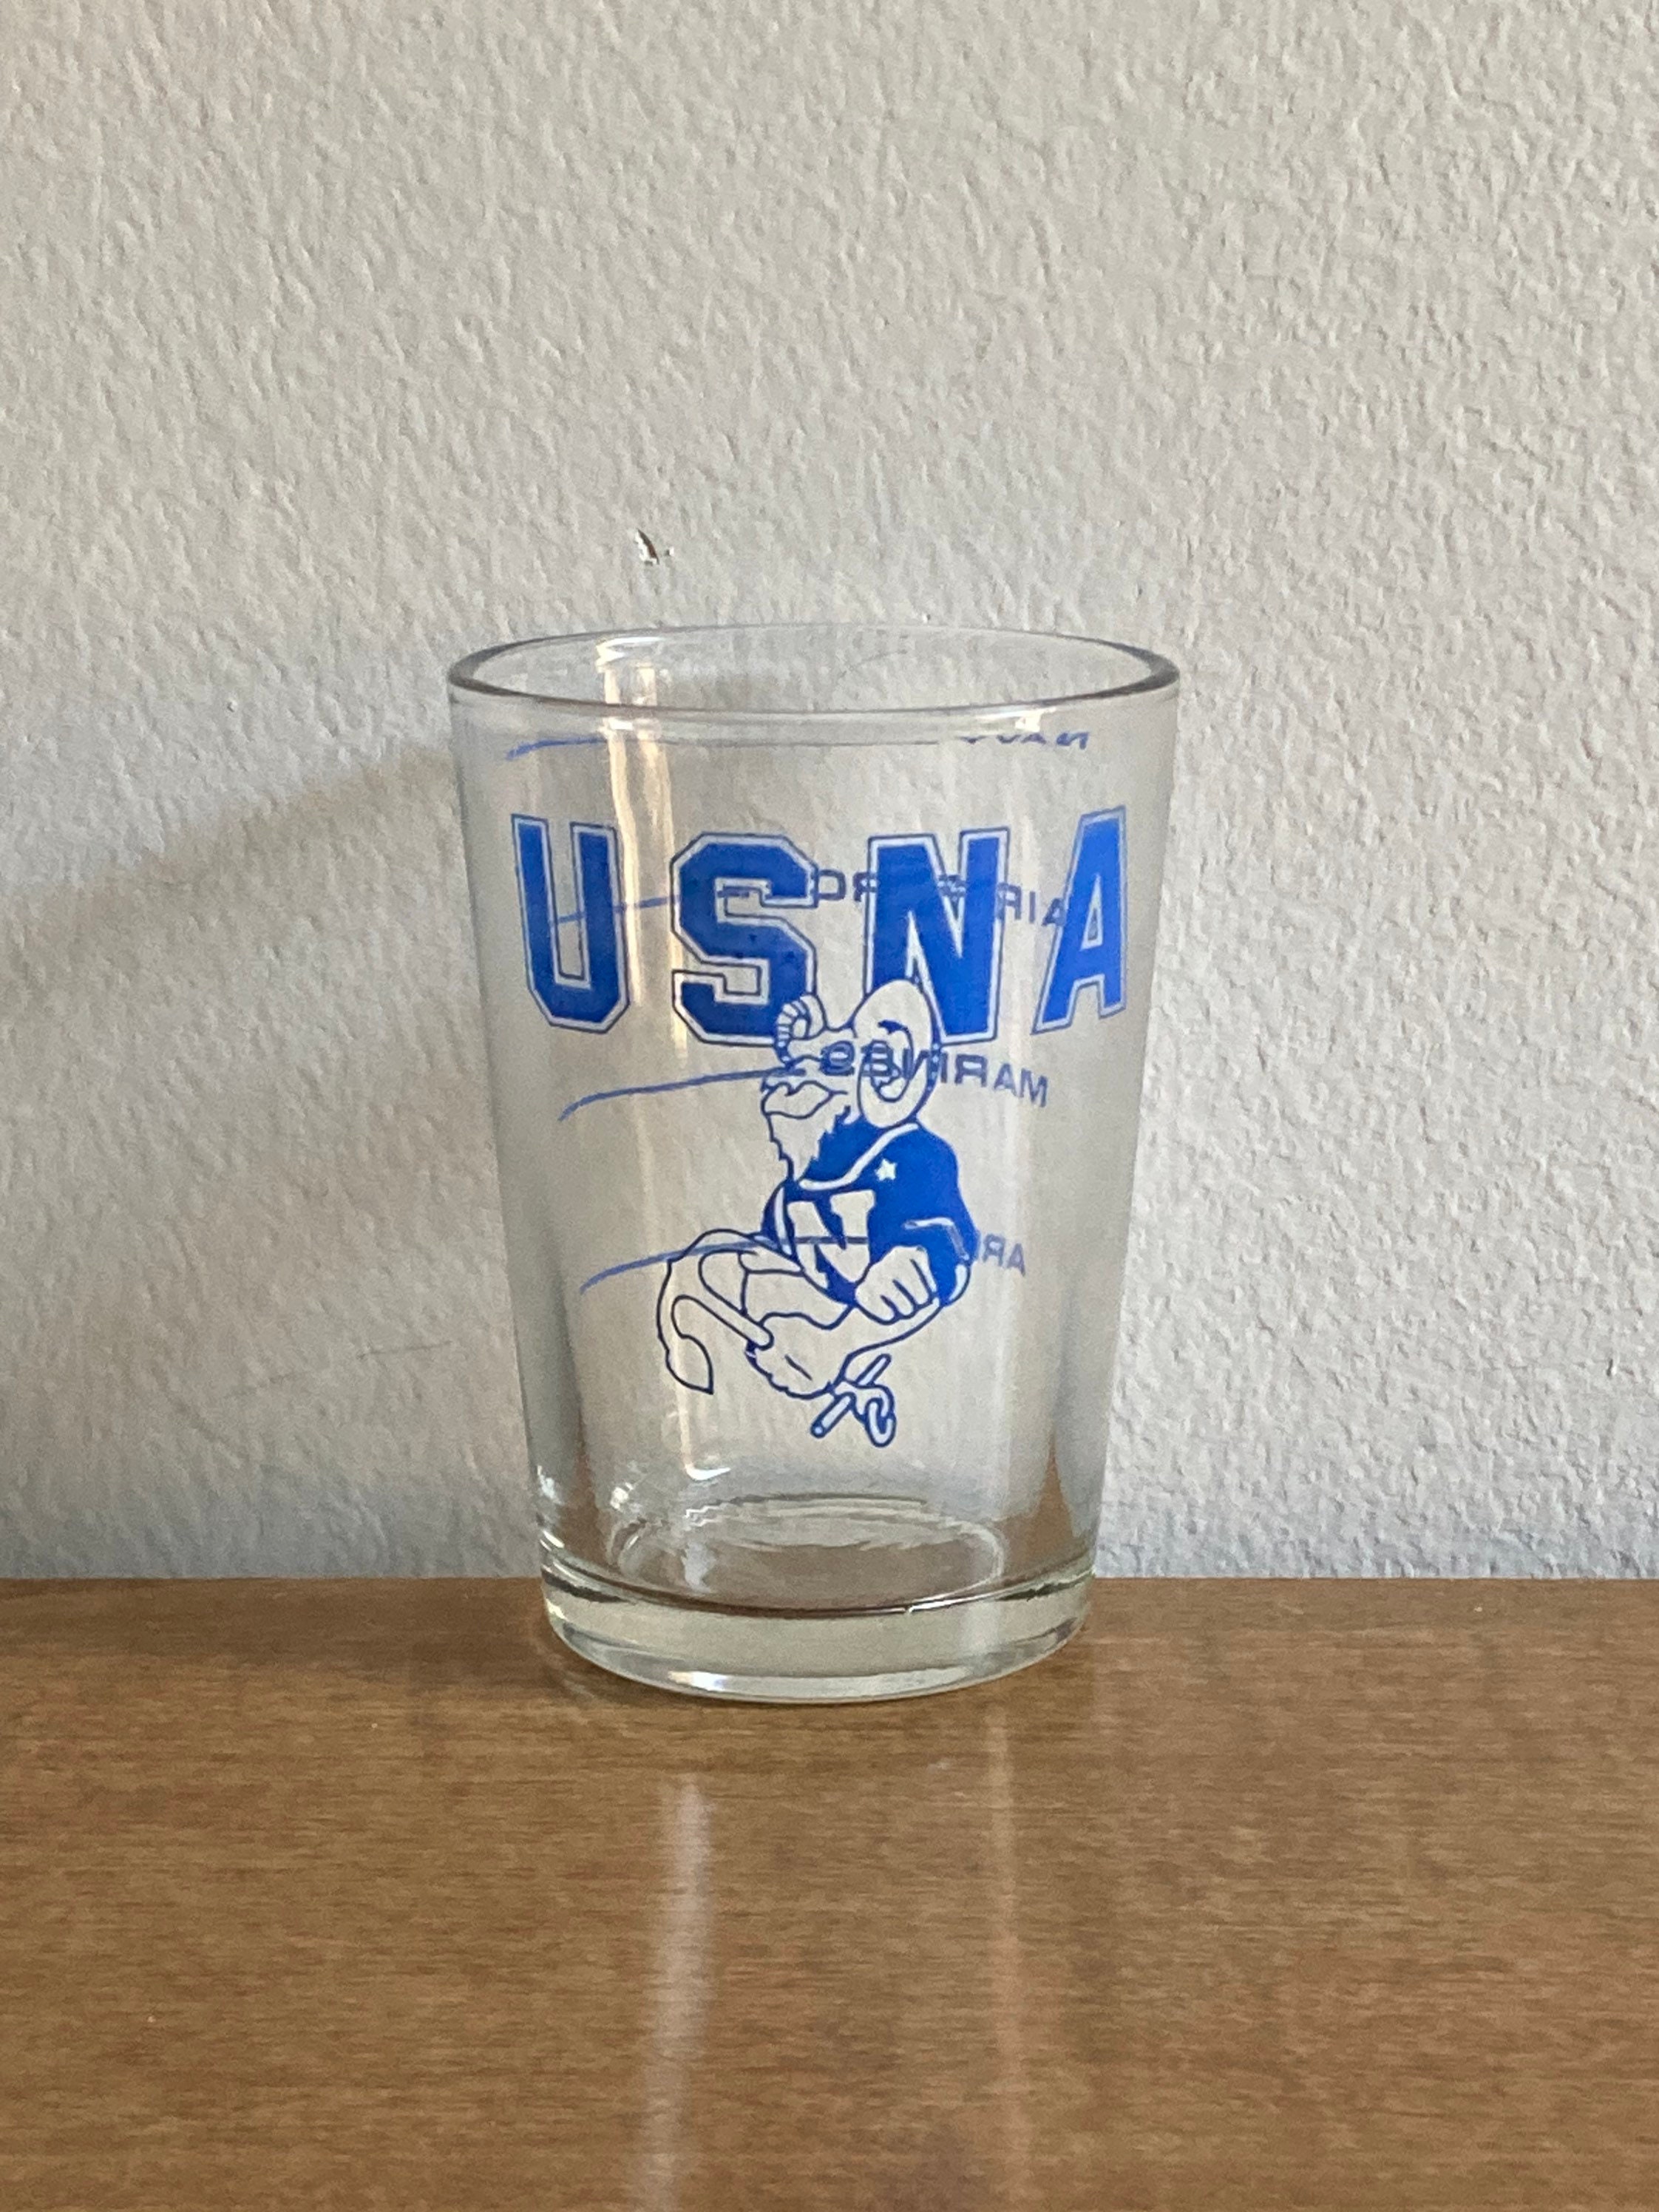 Army Marines Air Force Navy Tiered Shot Glass Navy Bar Vintage US Naval Academy Shot Glass